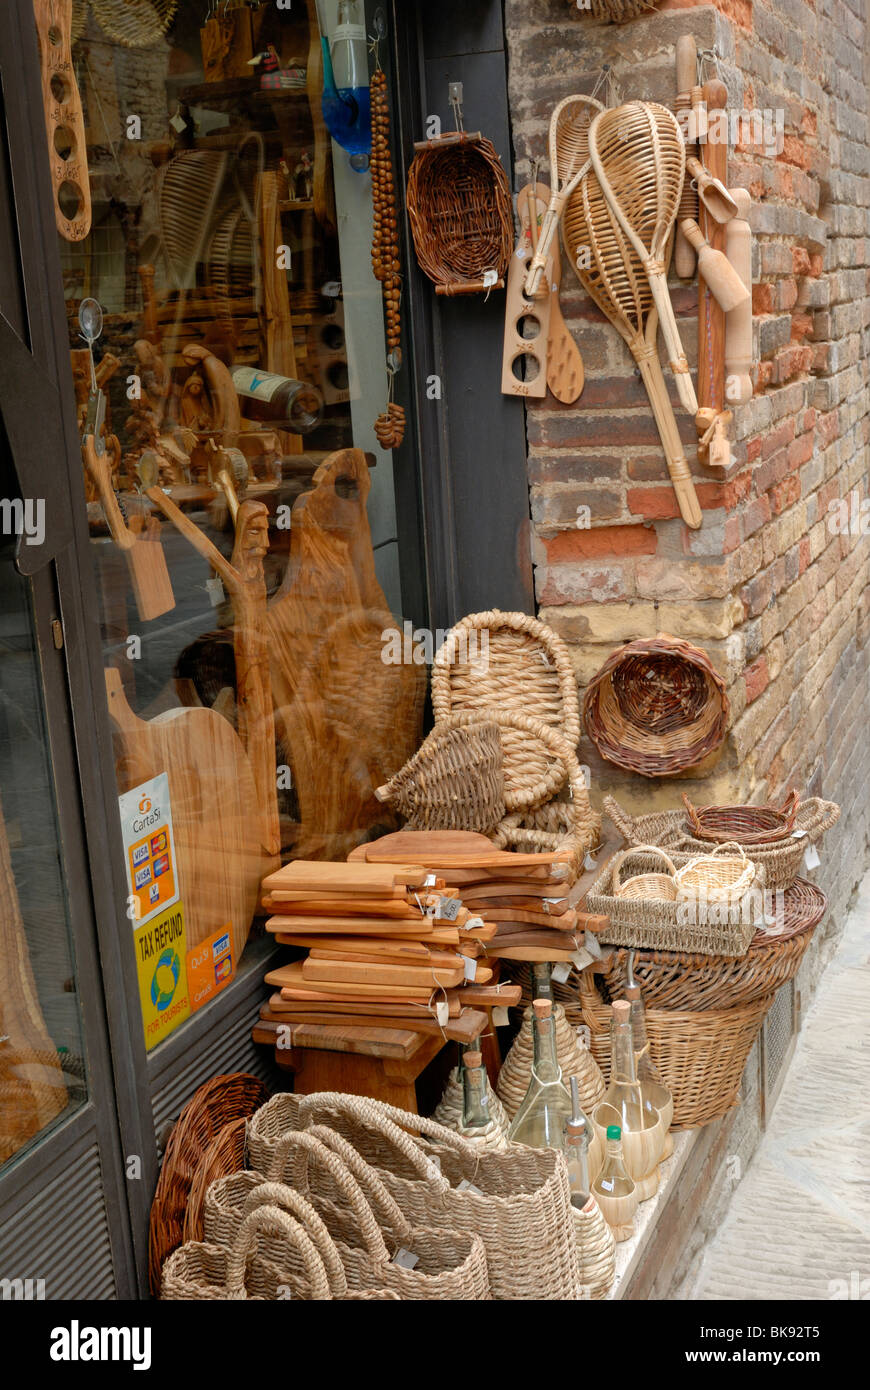 An artisan shop sell wicker and string baskets, wine and olive oil bottles, wooden cutting boards and much more. Via San Matteo, Stock Photo